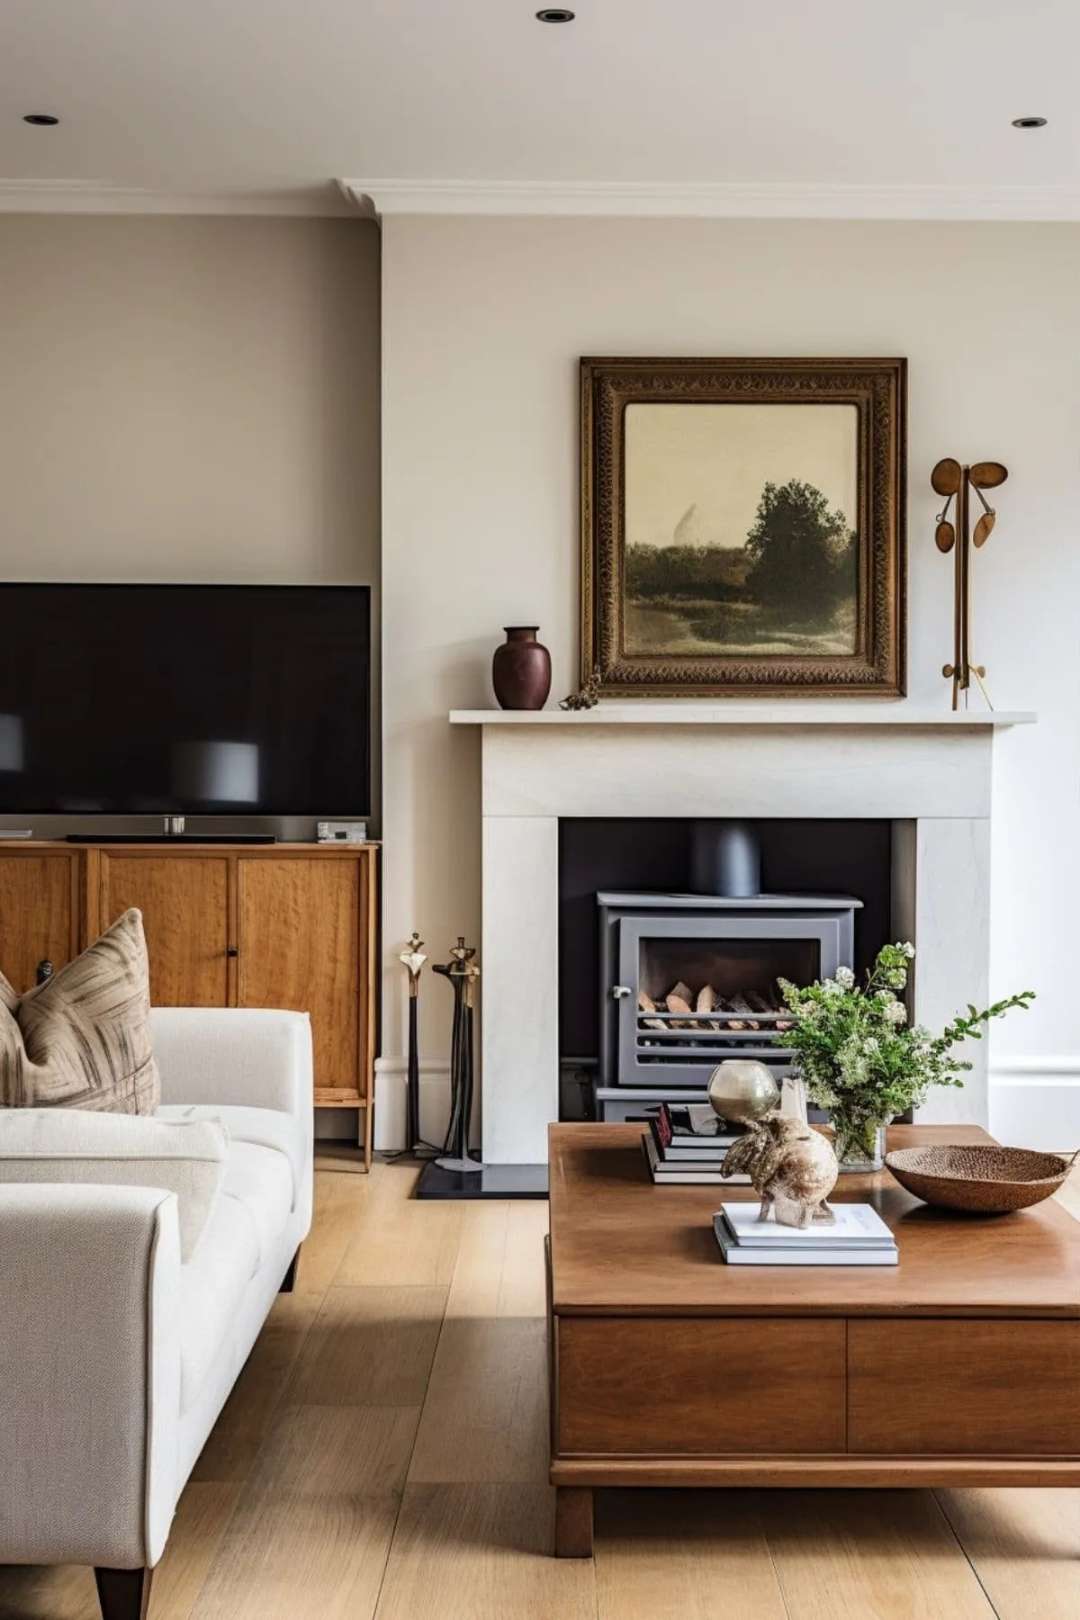 The Perfect Pair:  Living Room Ideas with a Fireplace and TV